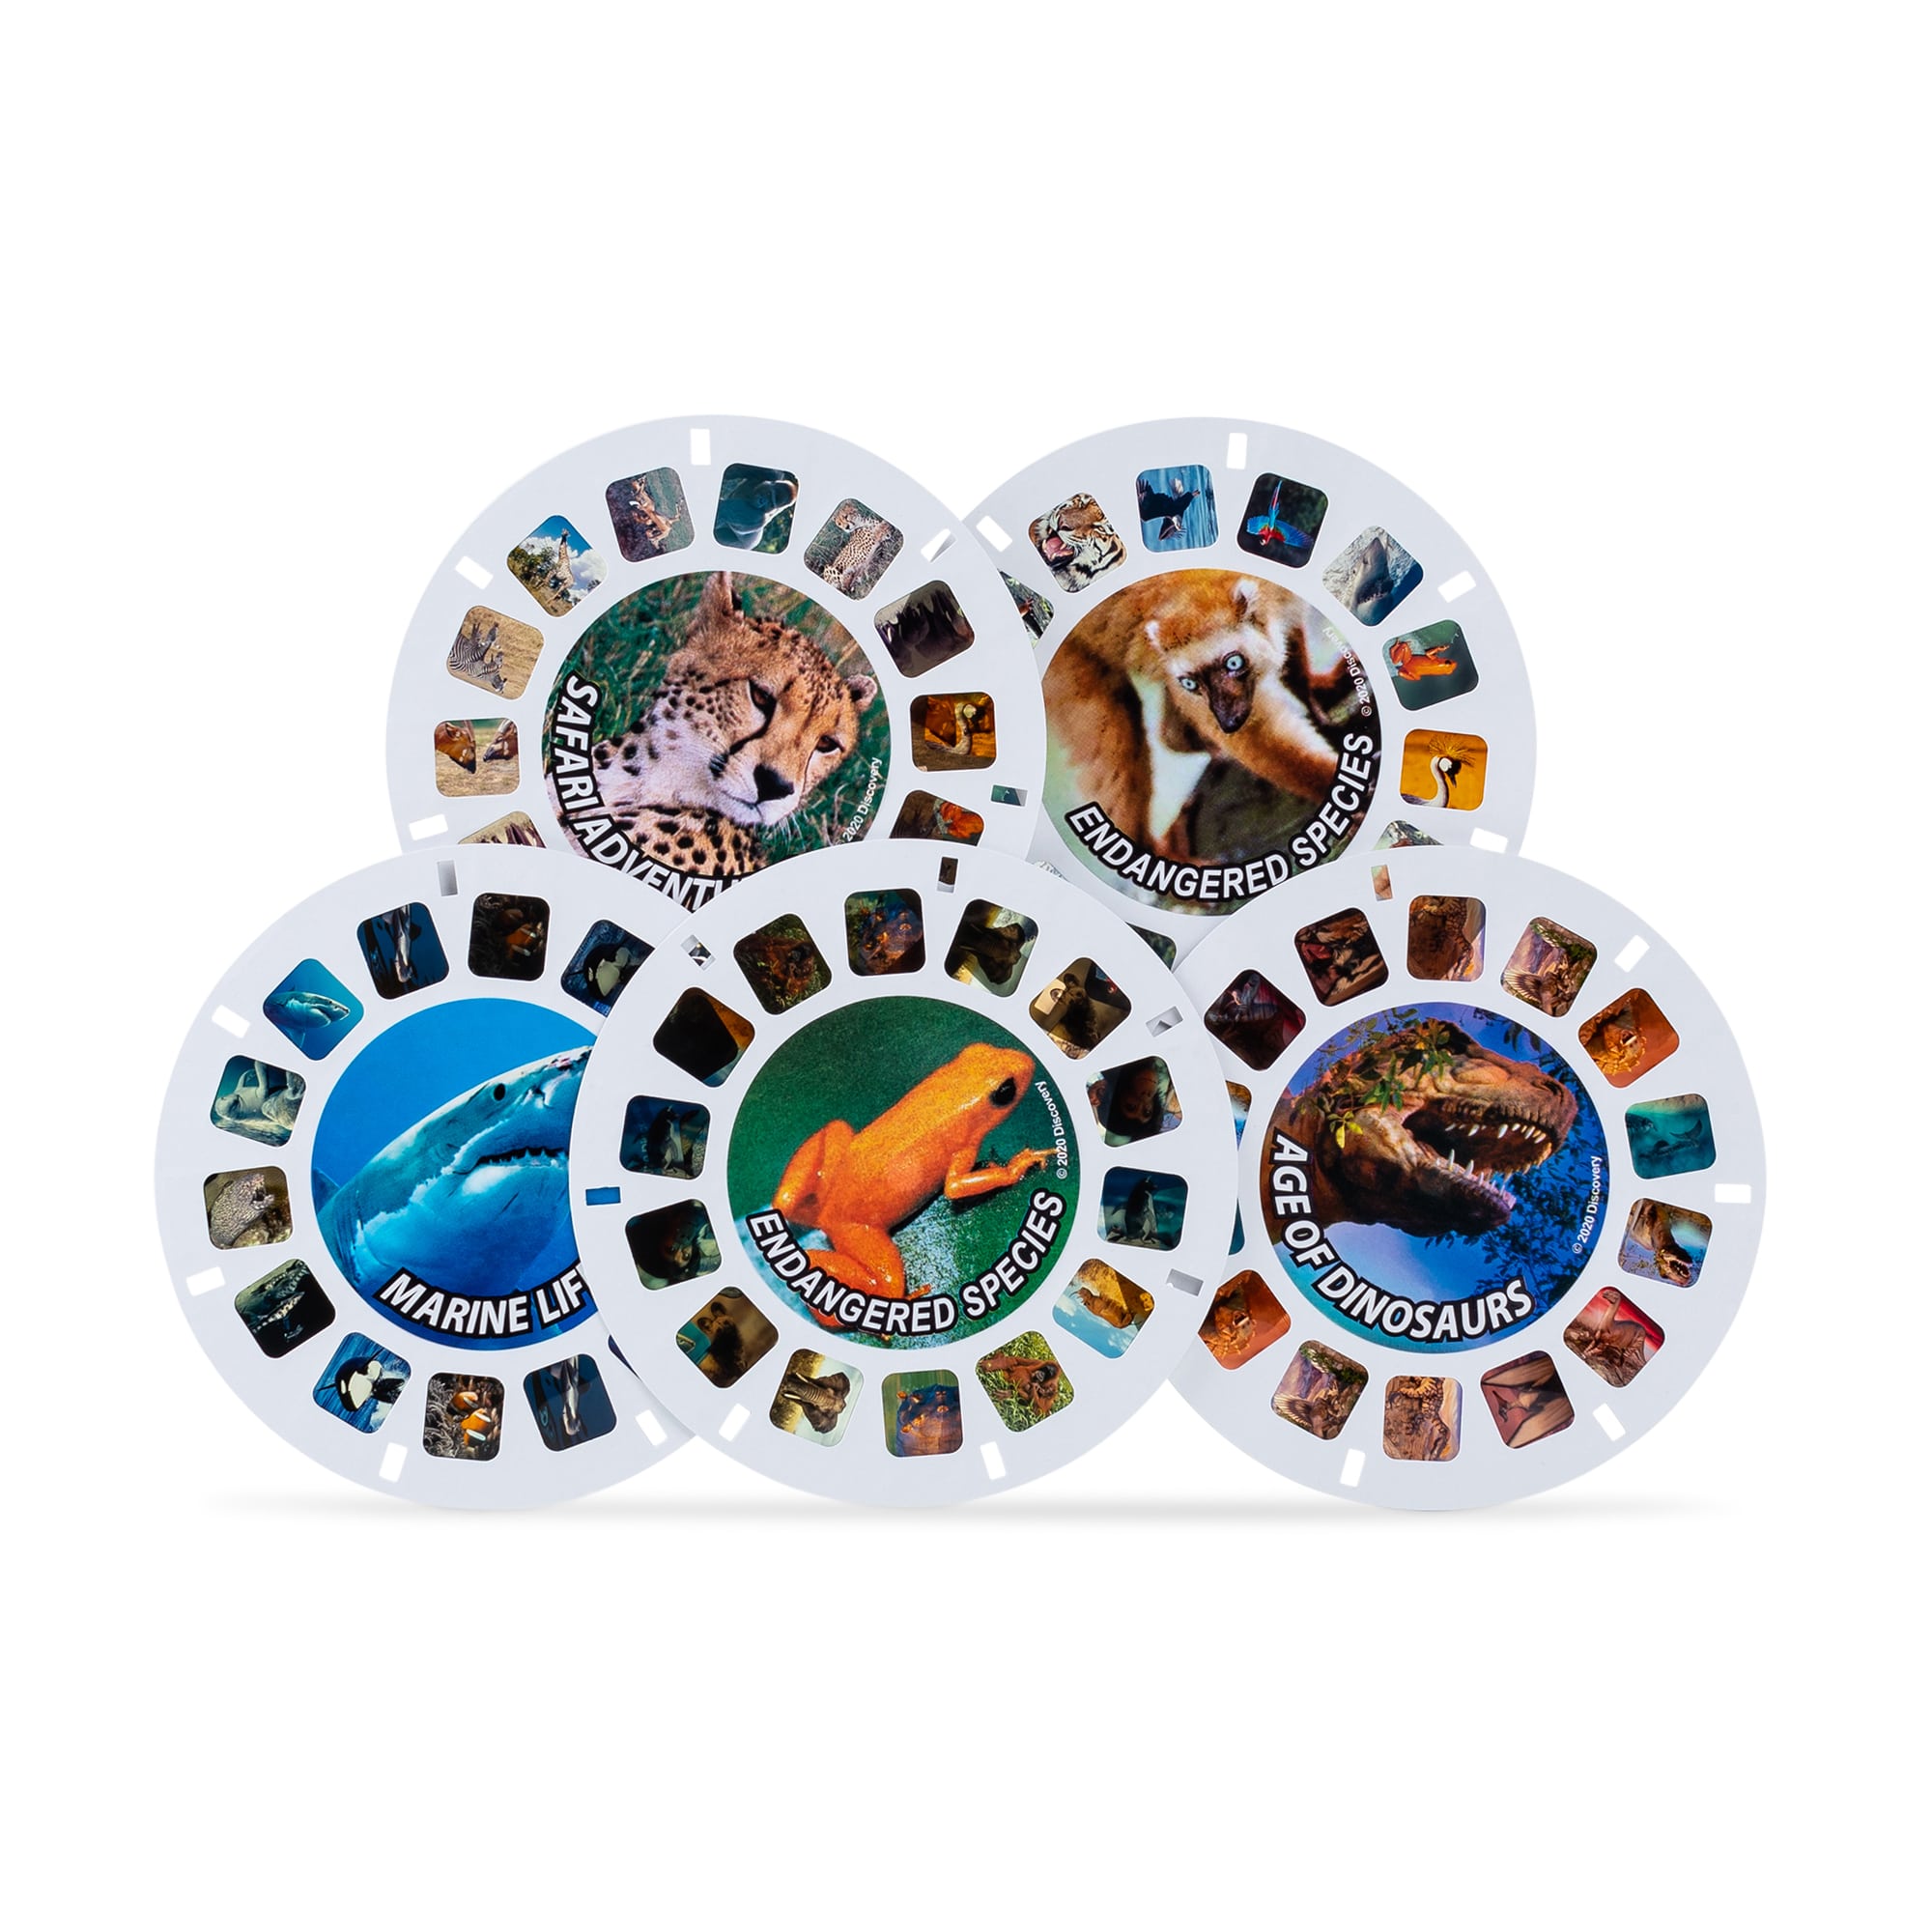 View-Master Reels Viewer, Most Valuable View Master Reels